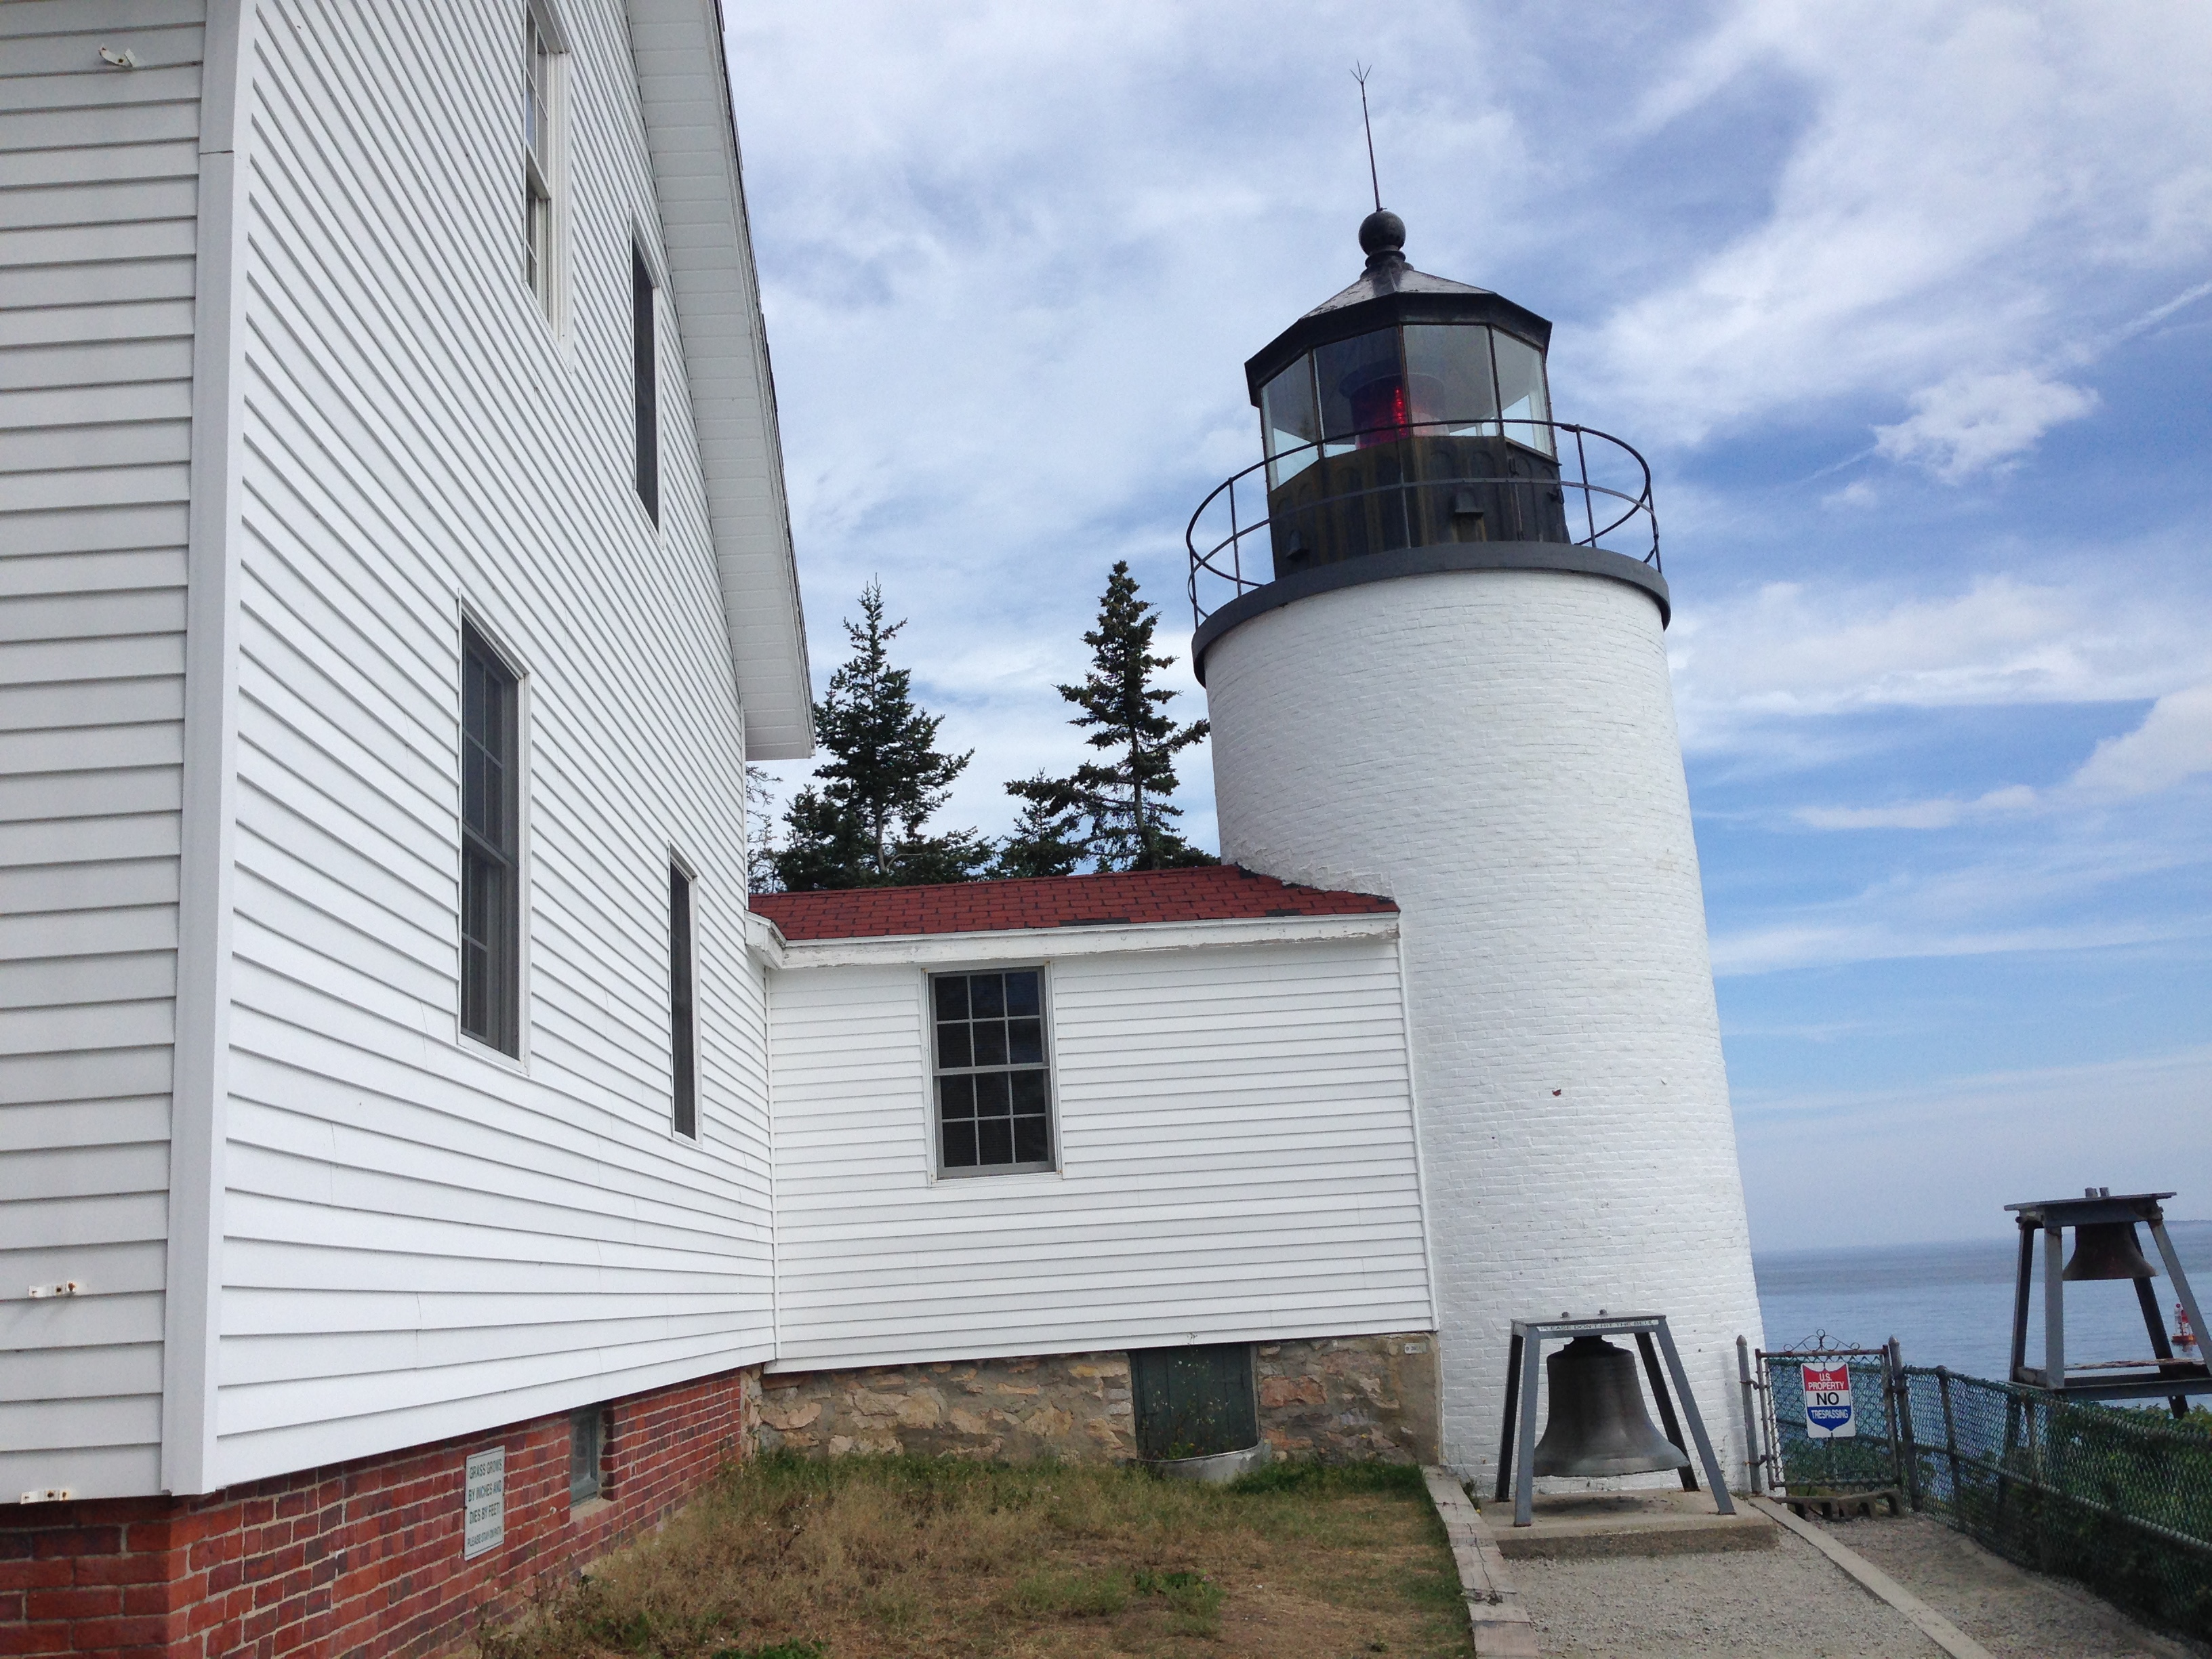 This is one of the many lighthouses that we visit.